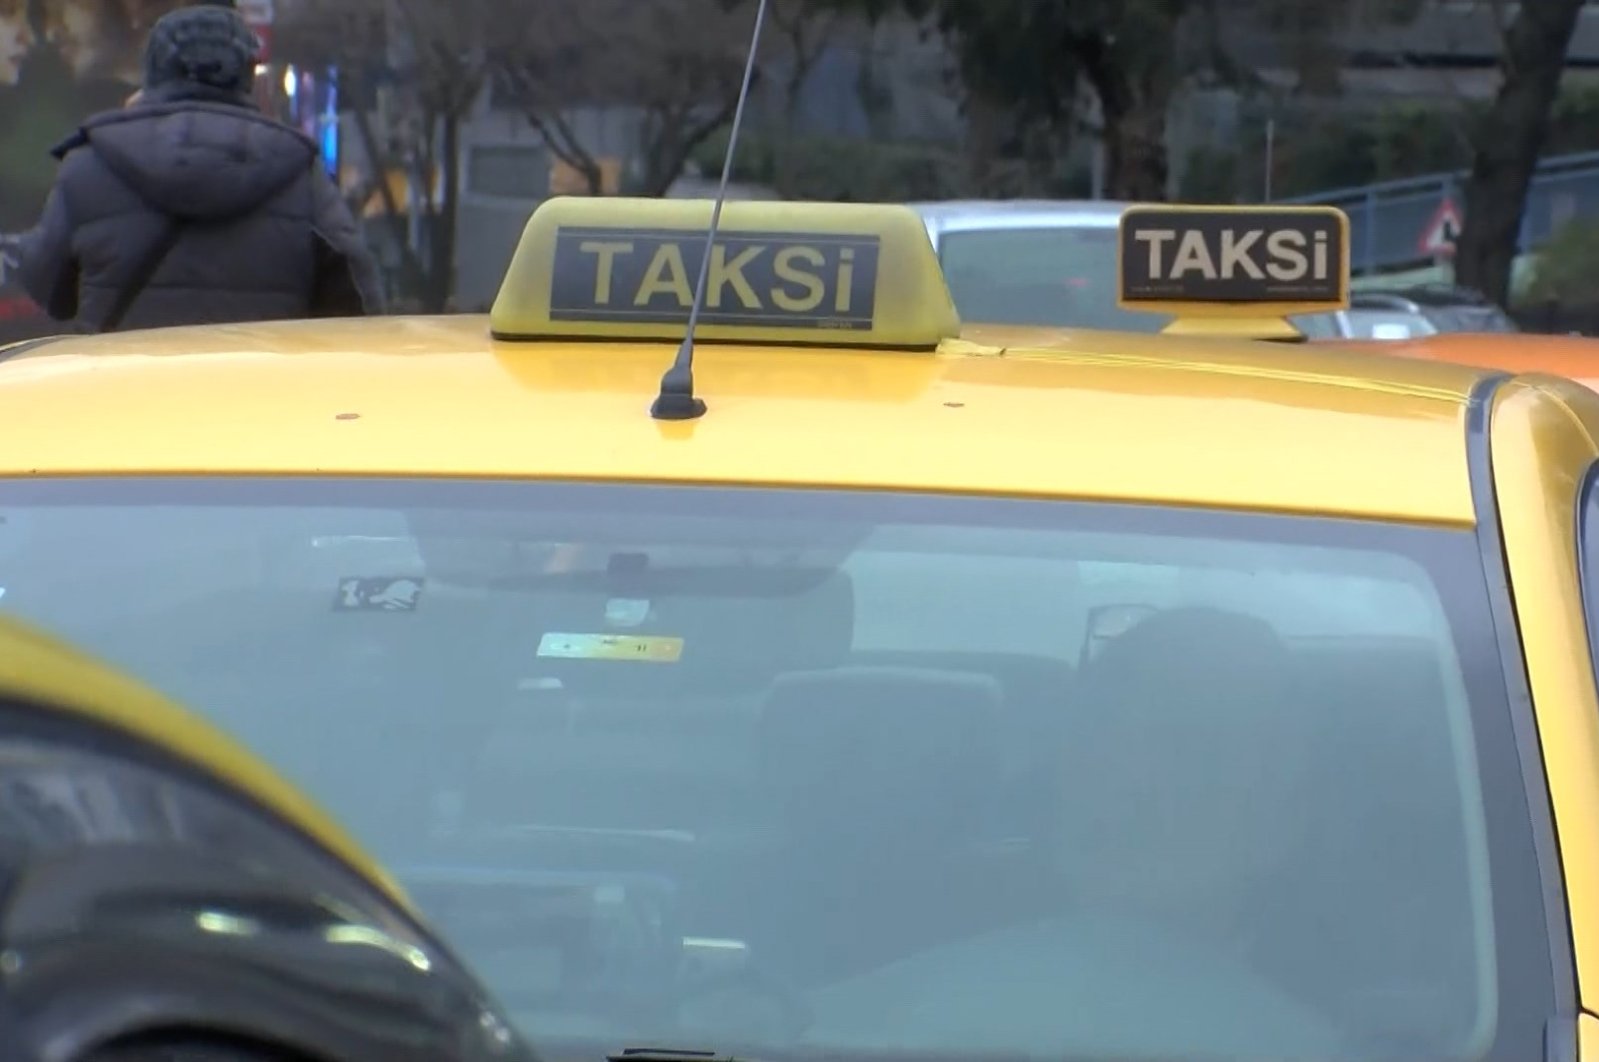 Taxis are seen parked in a row in Istanbul, Türkiye, Jan. 26, 2023. (DHA Photo)